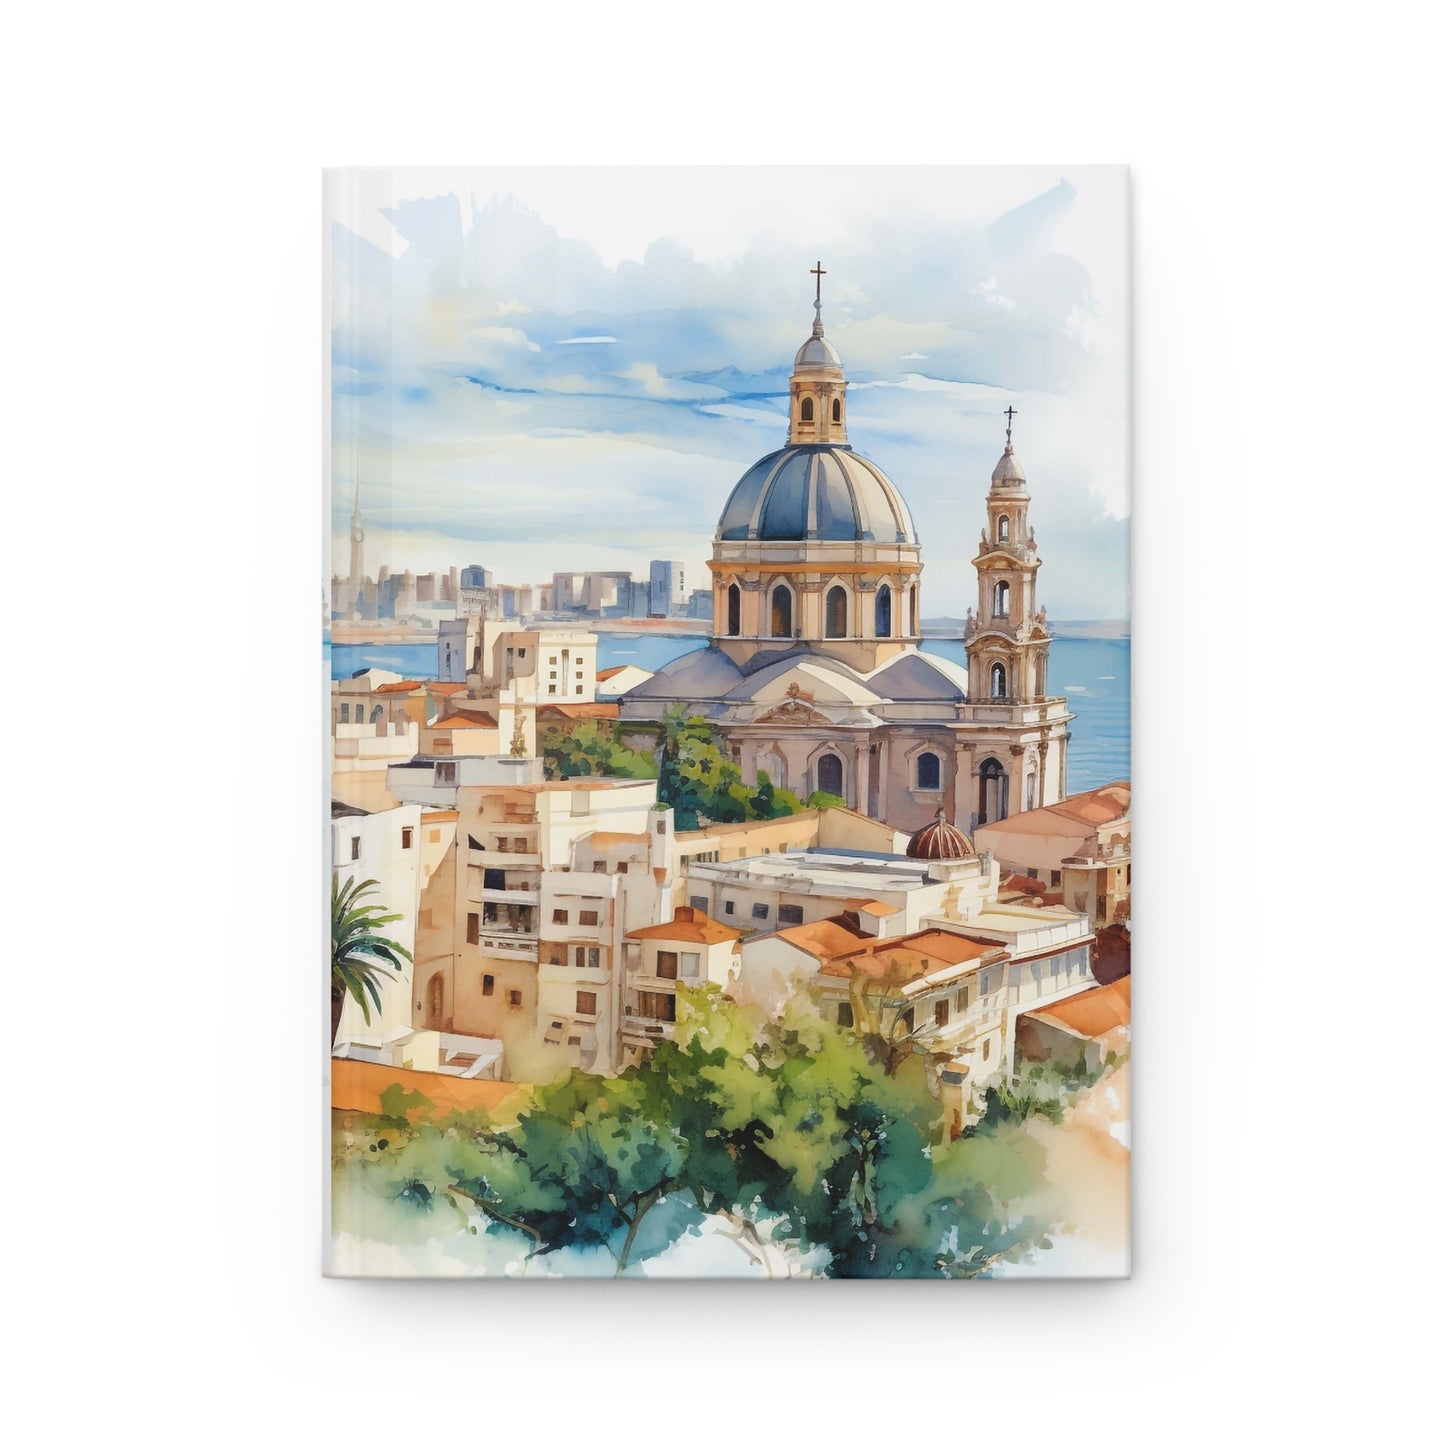 Capture Malaga's Essence: Premium Matte Hardcover Journal for Your Thoughts